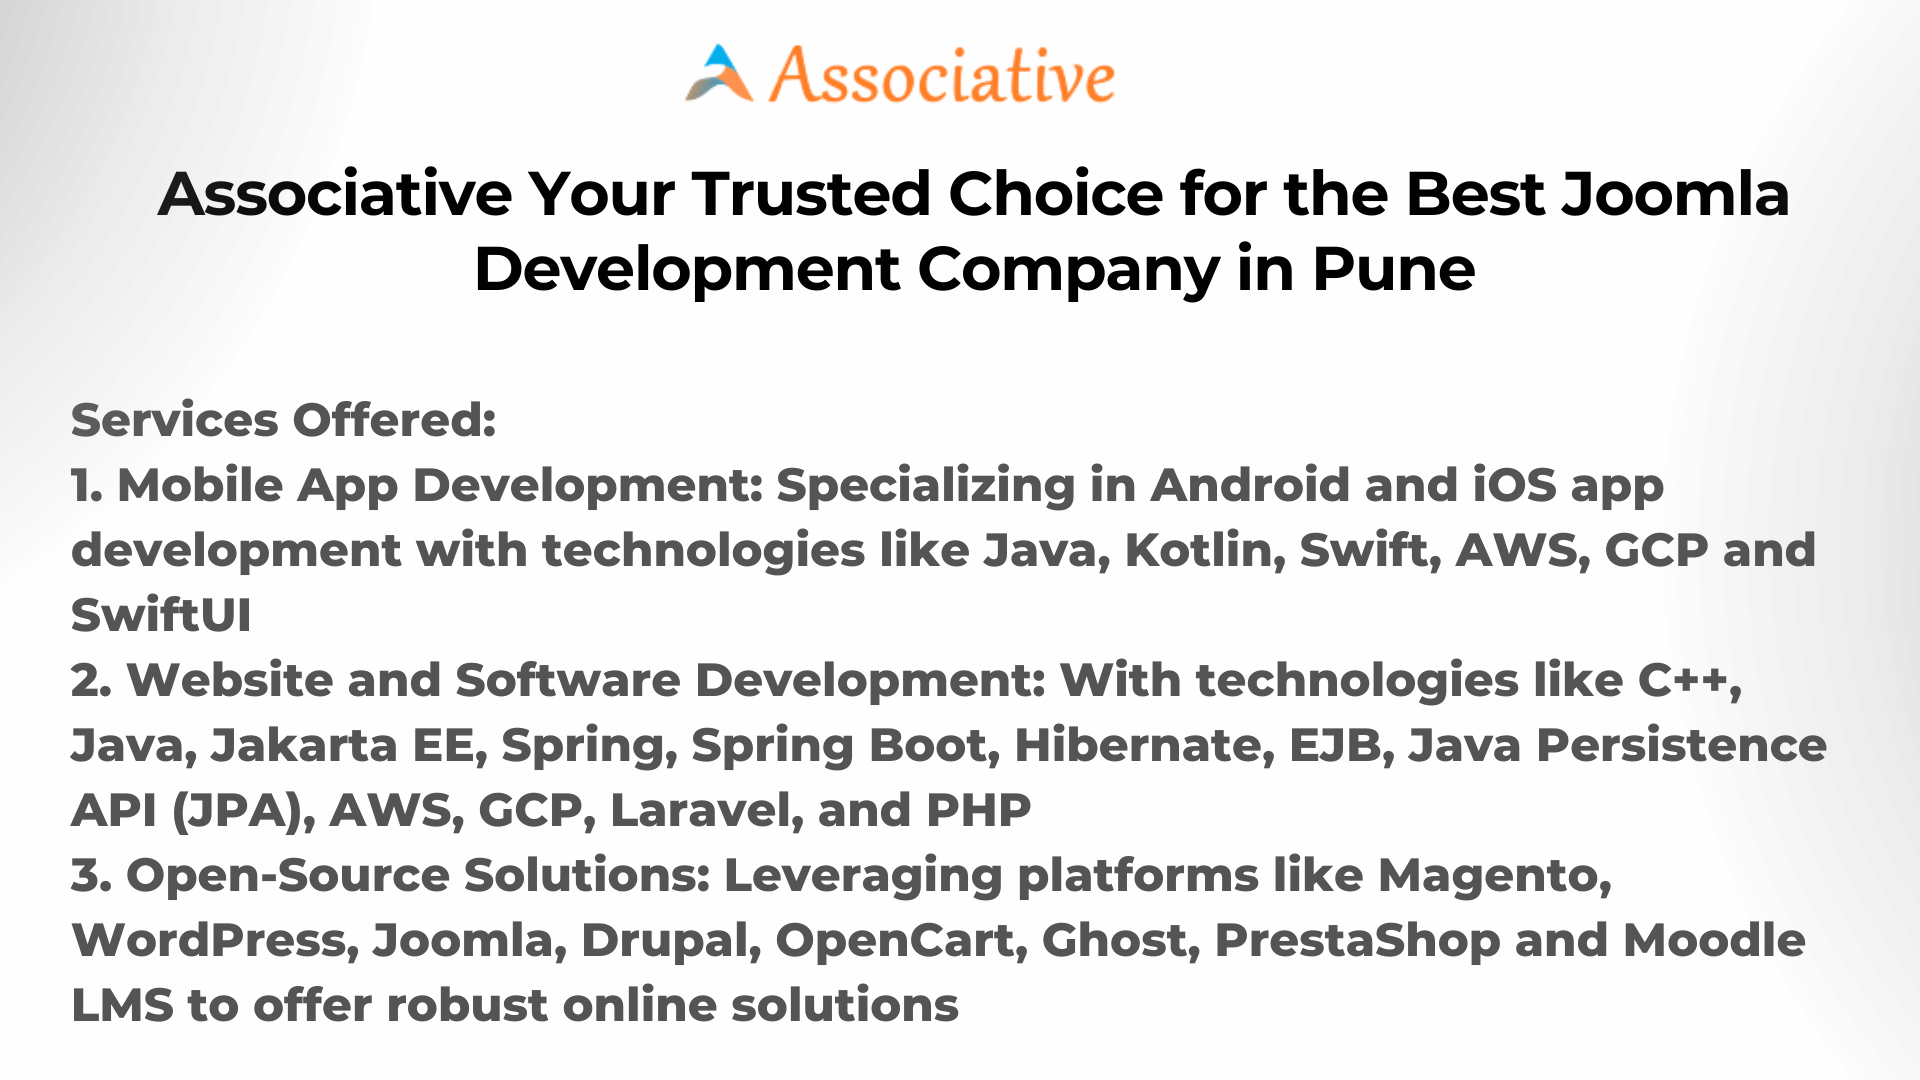 Associative Your Trusted Choice for the Best Joomla Development Company in Pune